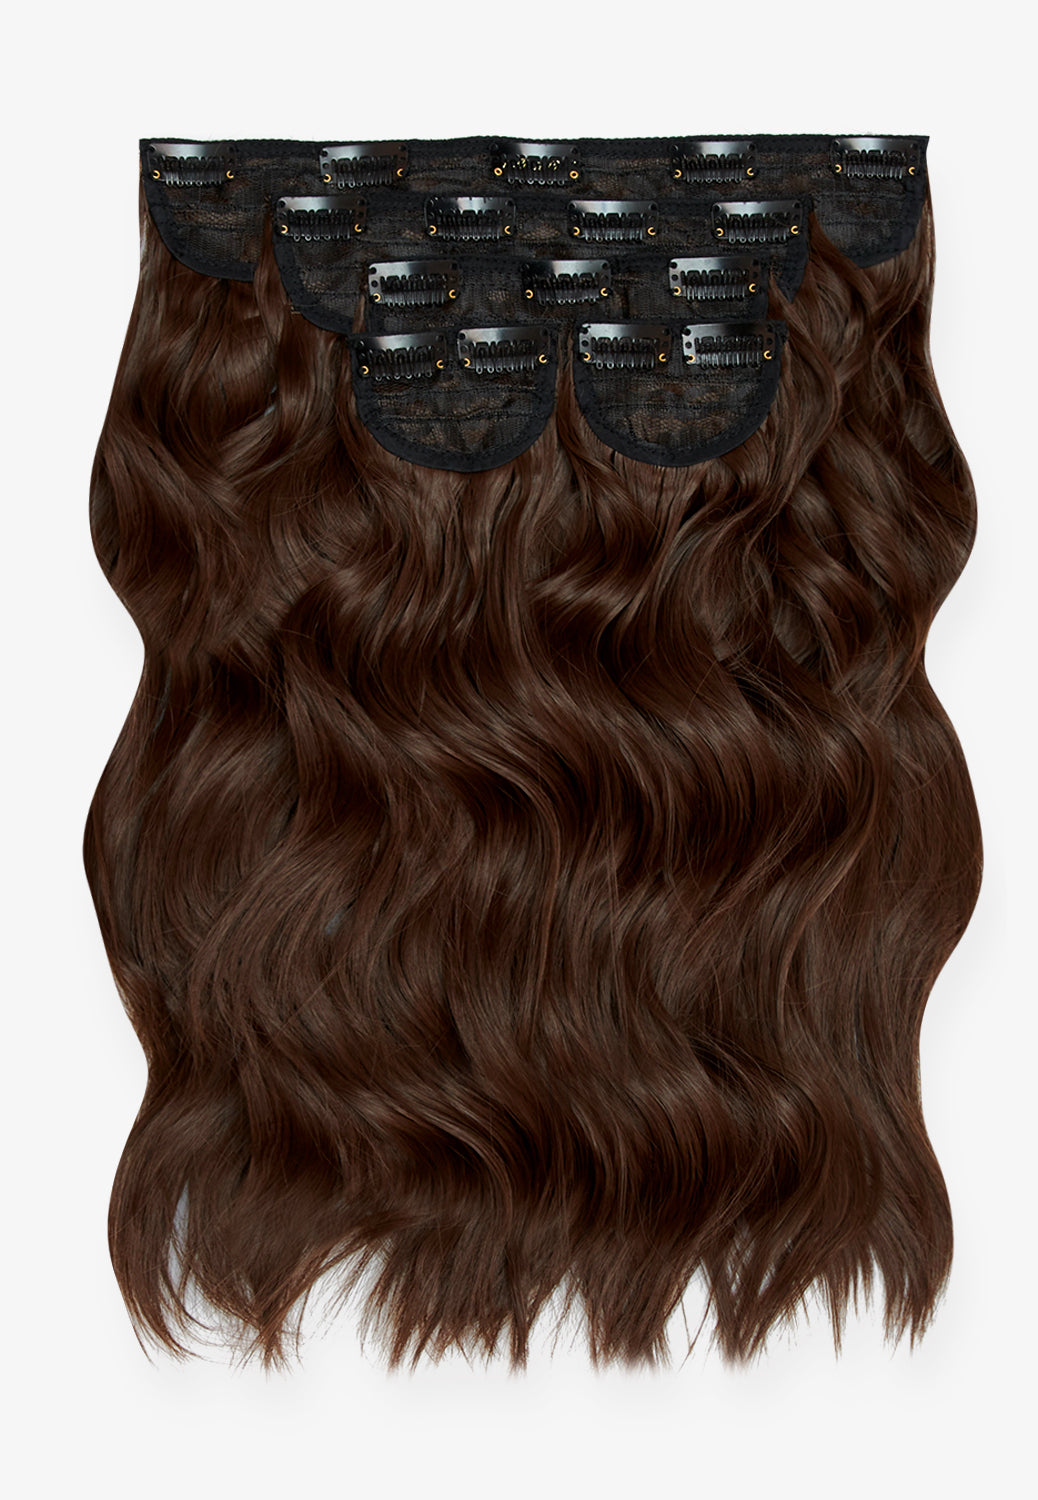 Super Thick 16’’ 5 Piece Brushed Out Wave Clip In Hair Extensions + Hair Care Bundle - Chocolate Brown